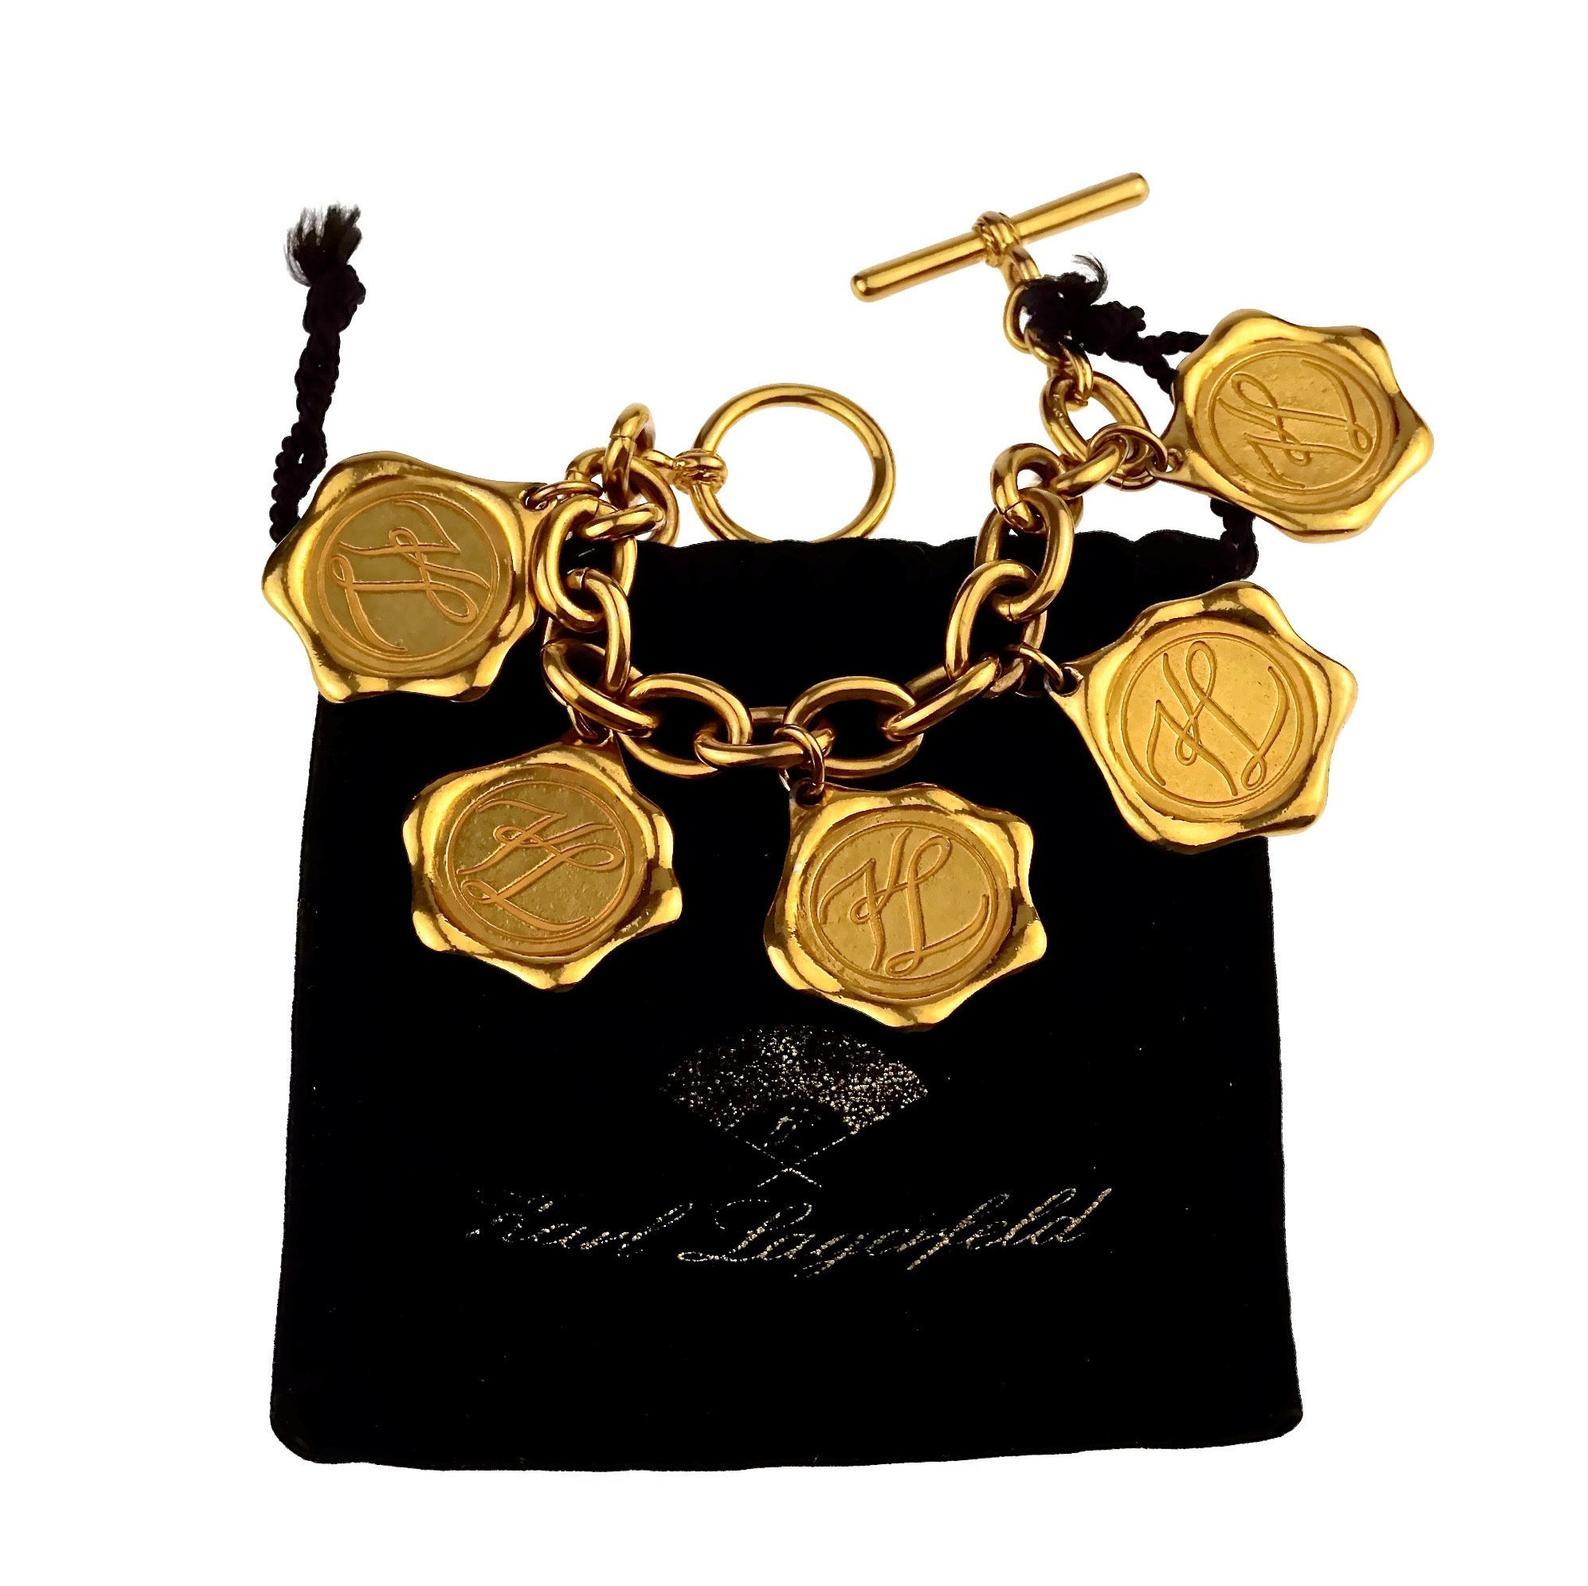 Vintage KARL LAGERFELD Logo Wax Seal Coin Medallion Charm Bracelet

Measurements:
Height: 2.16 inches (5.5 cm)
WearableLength: 8.26 inches (21 cm)

Features: 
- 100% Authentic KARL LAGERFELD.
- Wax seal motif.
- Embossed KARL LAGERFELD at the front